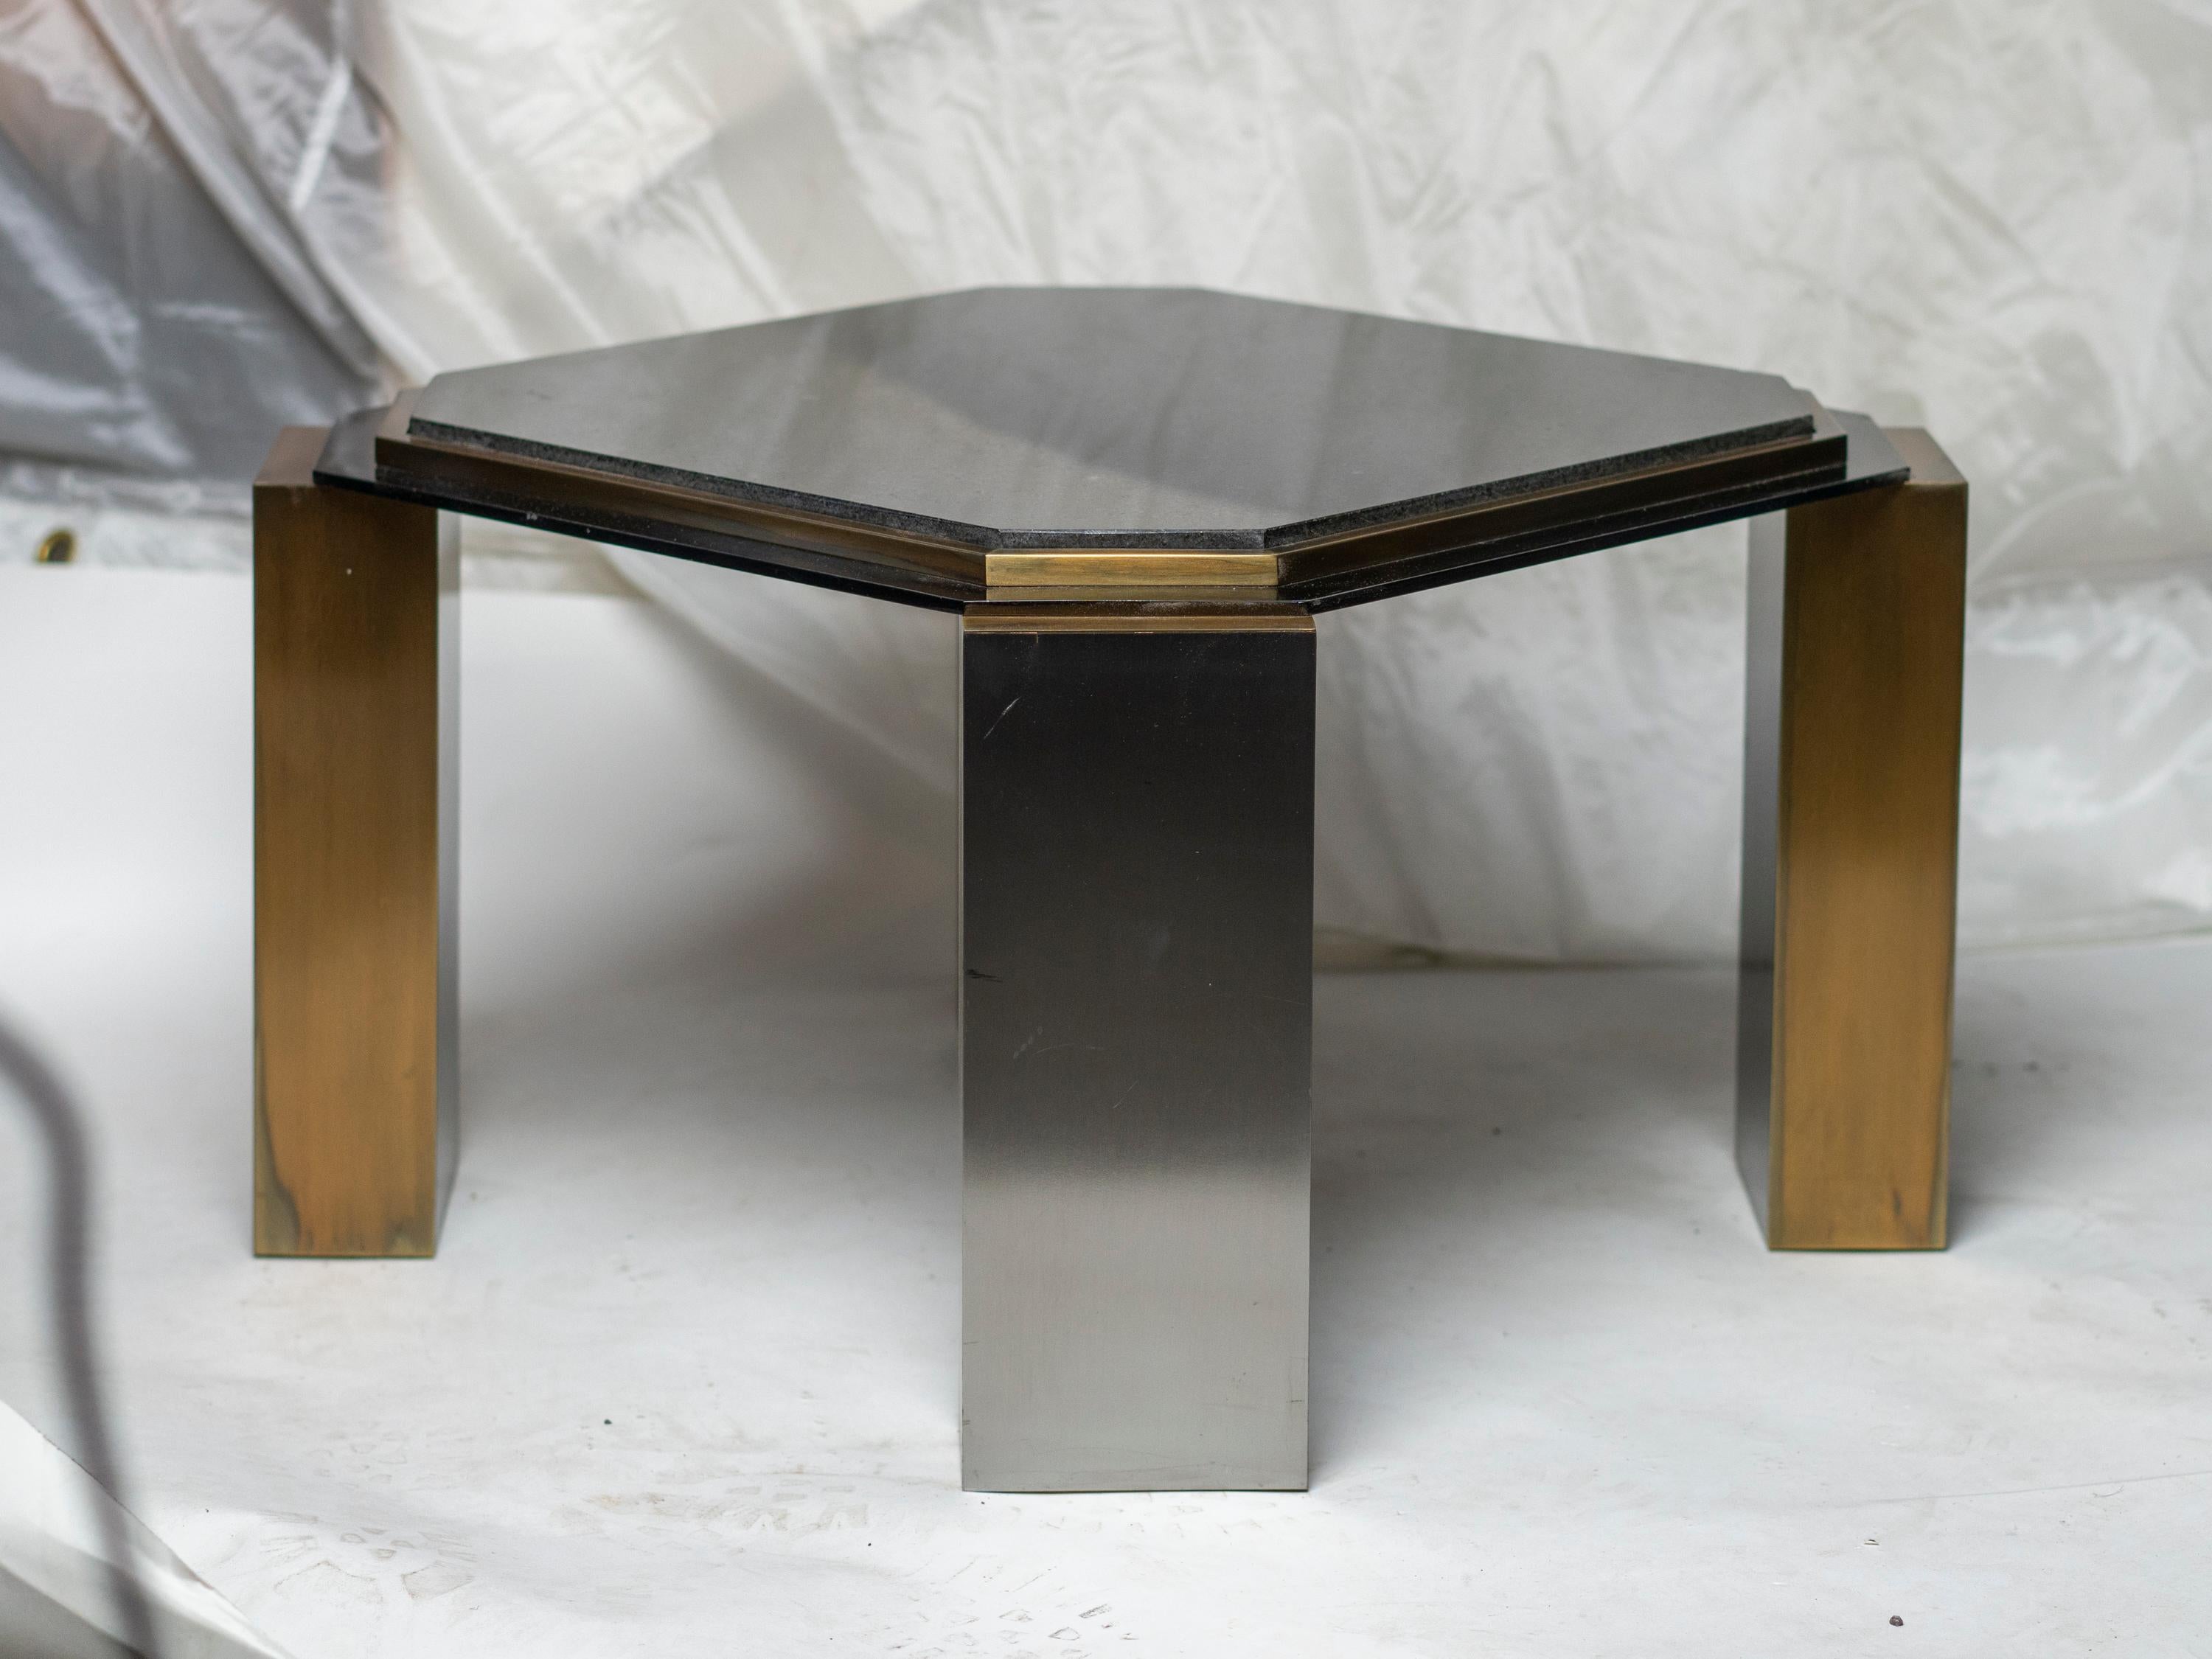 Pair of 1980's Modernist Low Tables in Enameled Steel and Patinated Brass In Good Condition For Sale In Montreal, QC